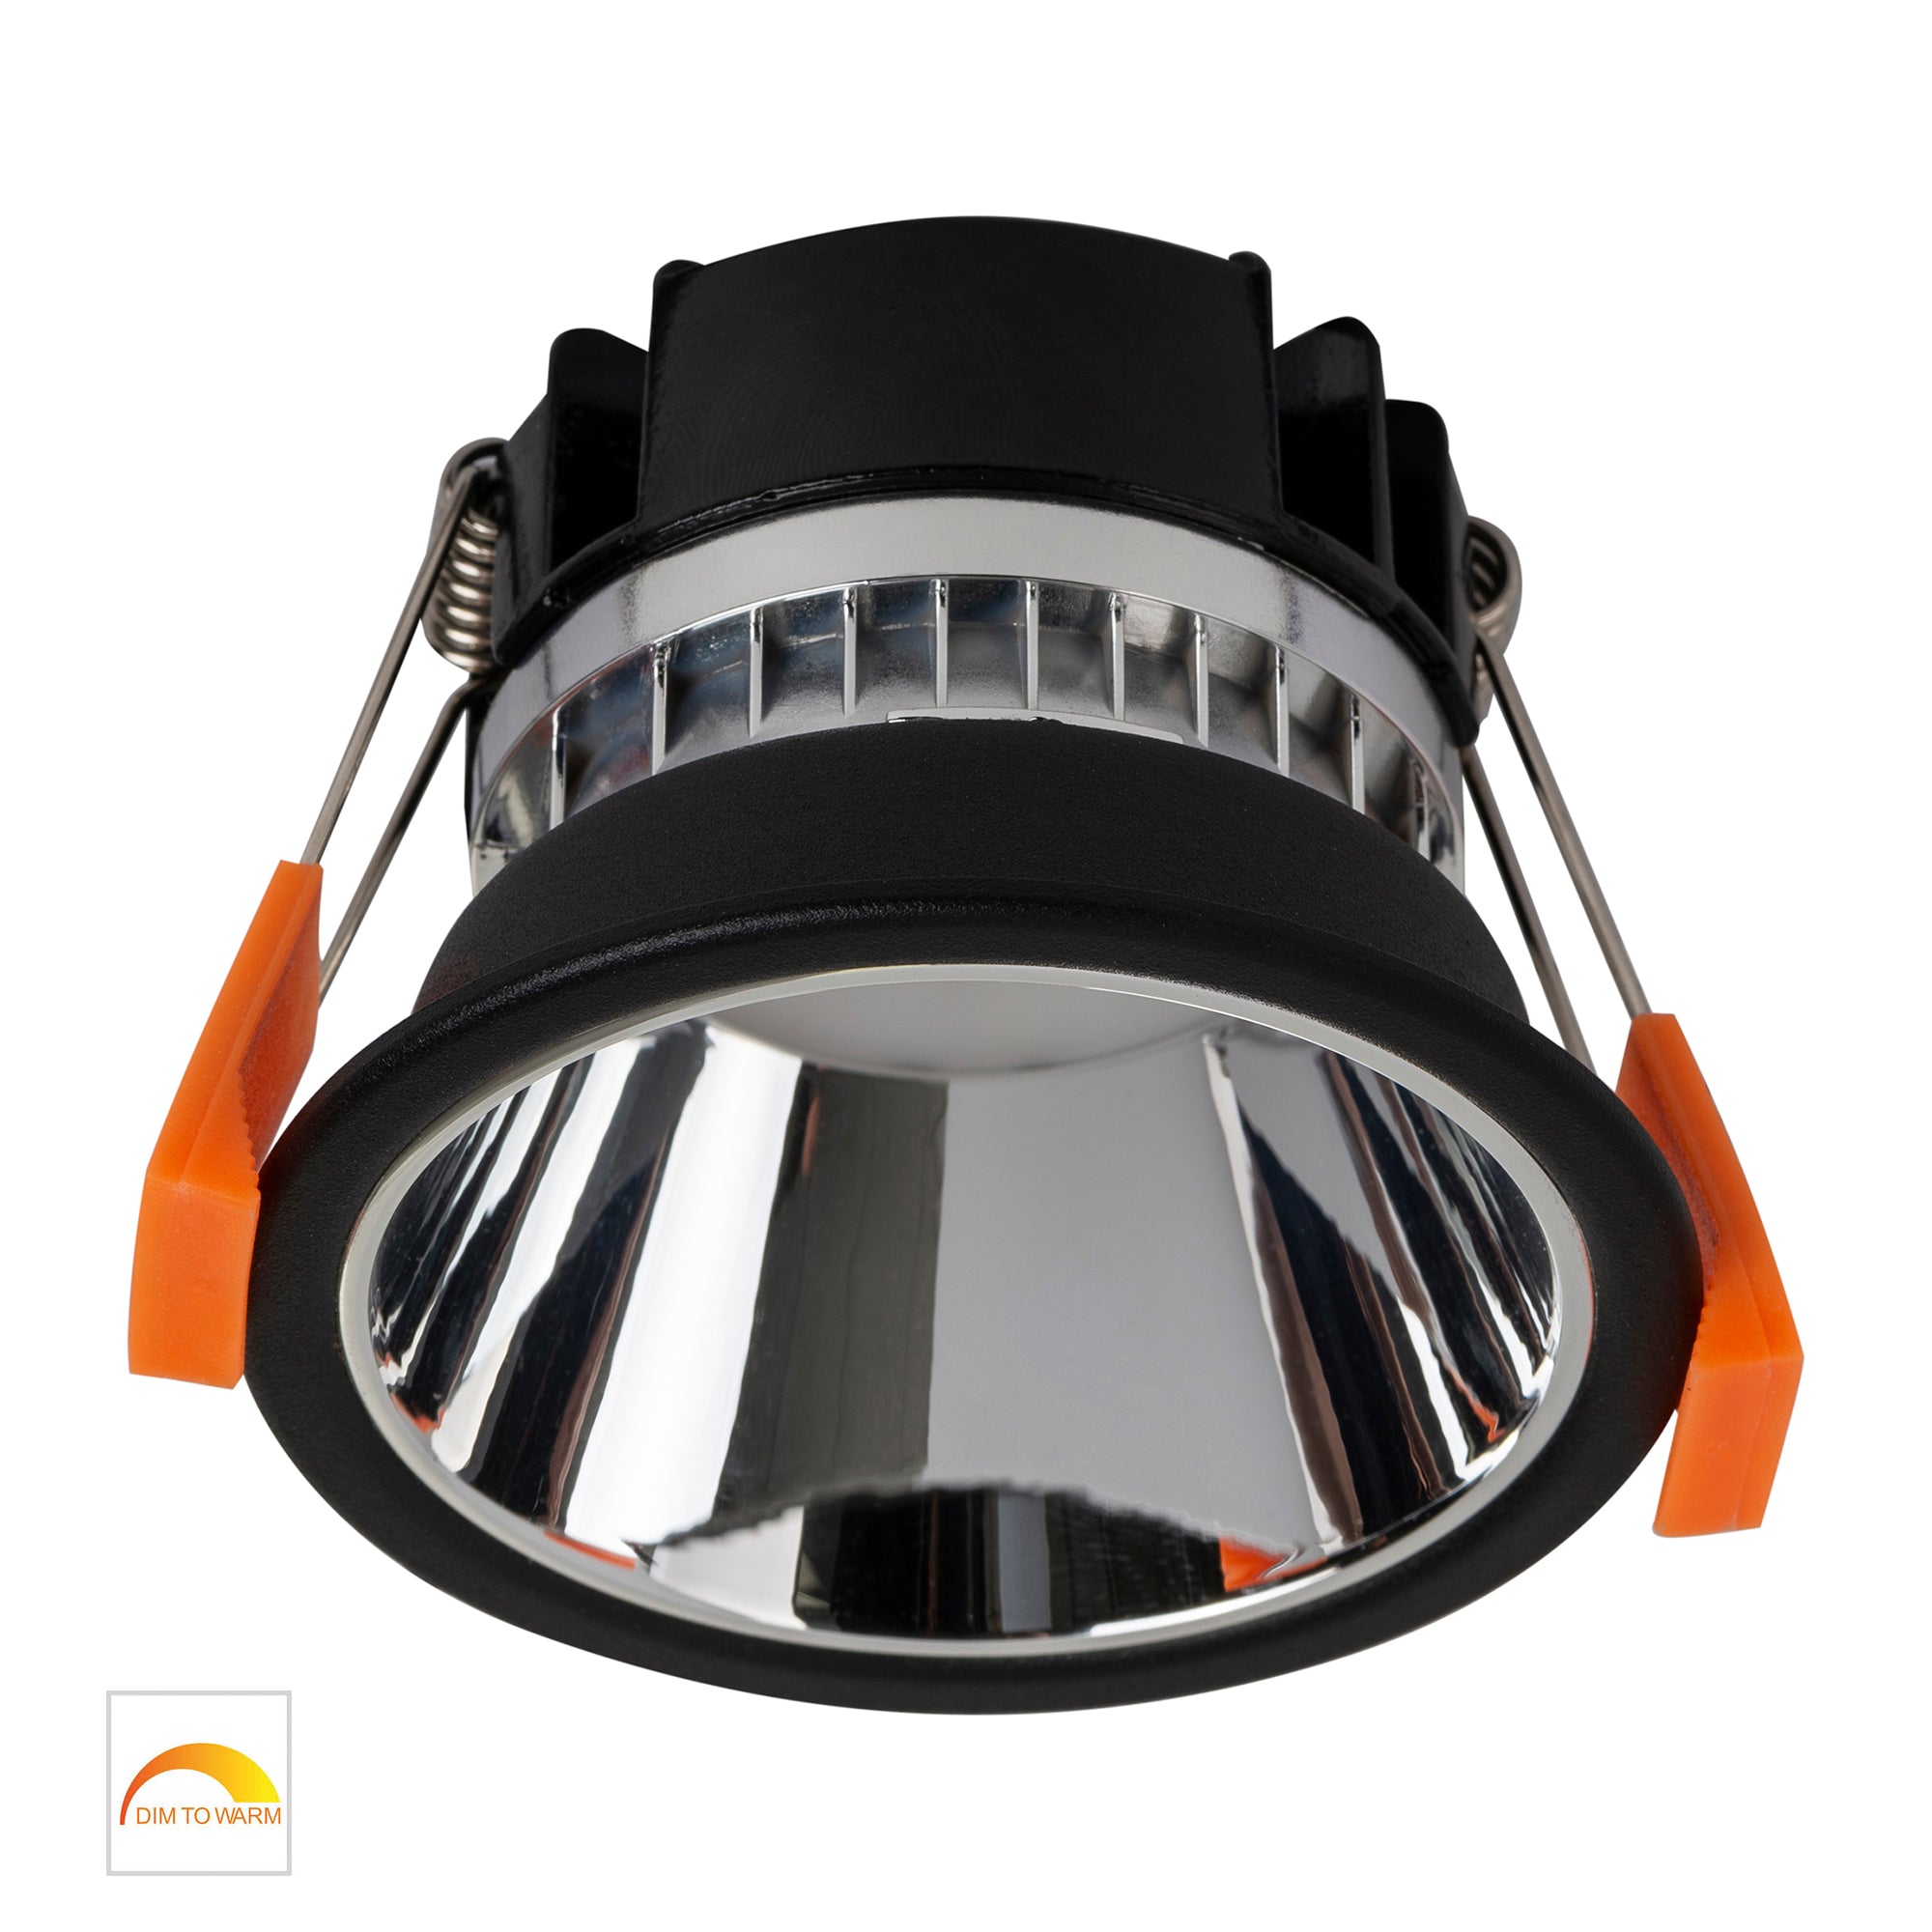 HV5529D2W-BC - Gleam Black with Chrome Insert Fixed Dim to Warm LED Downlight